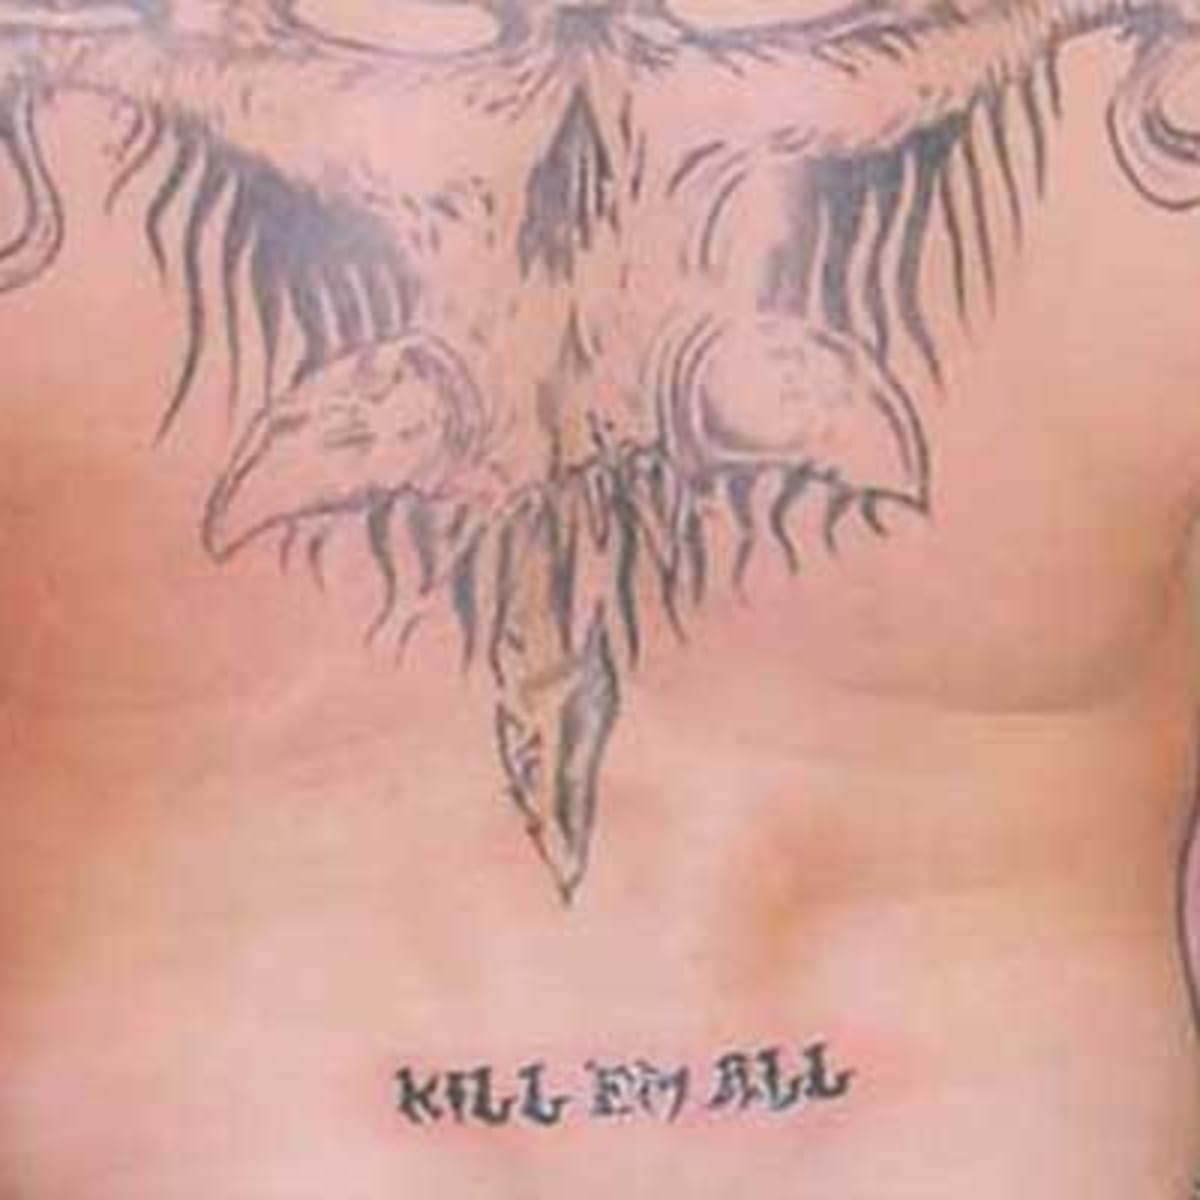 Brock Lesnar tattoos What does the ink on his chest and back mean